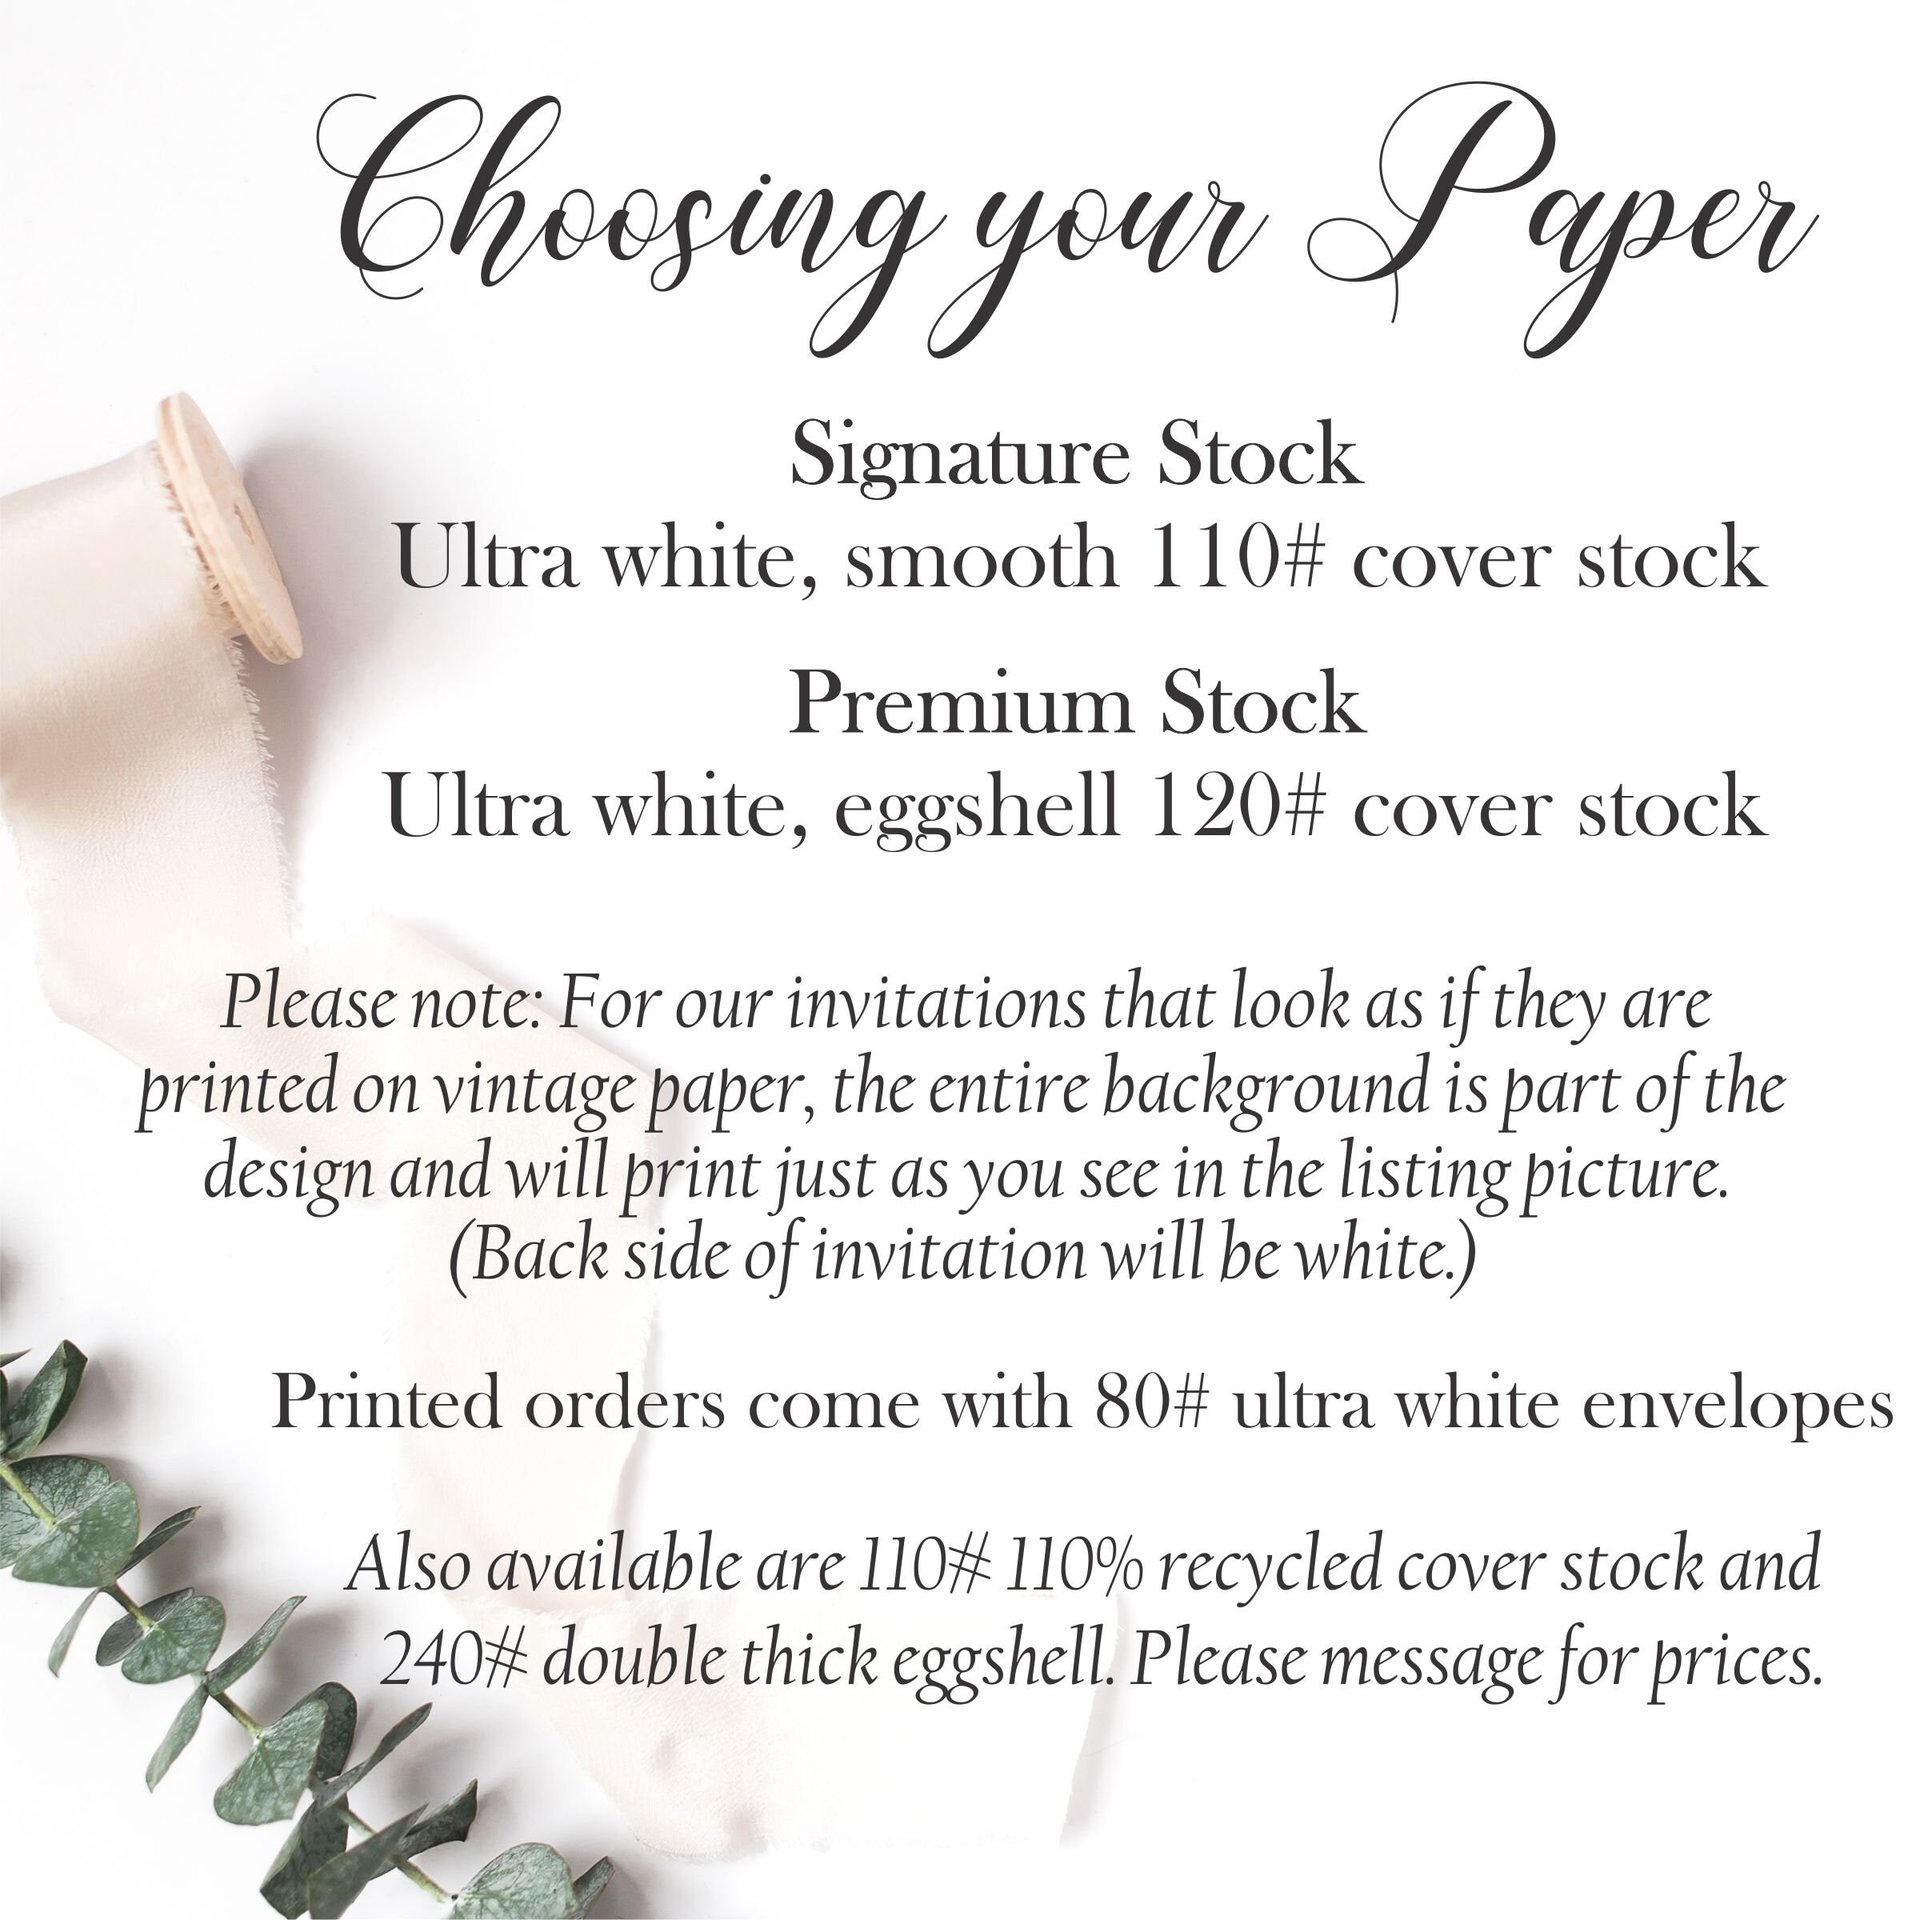 Pine, Holly, and White Floral Winter Bridal Shower Invitation